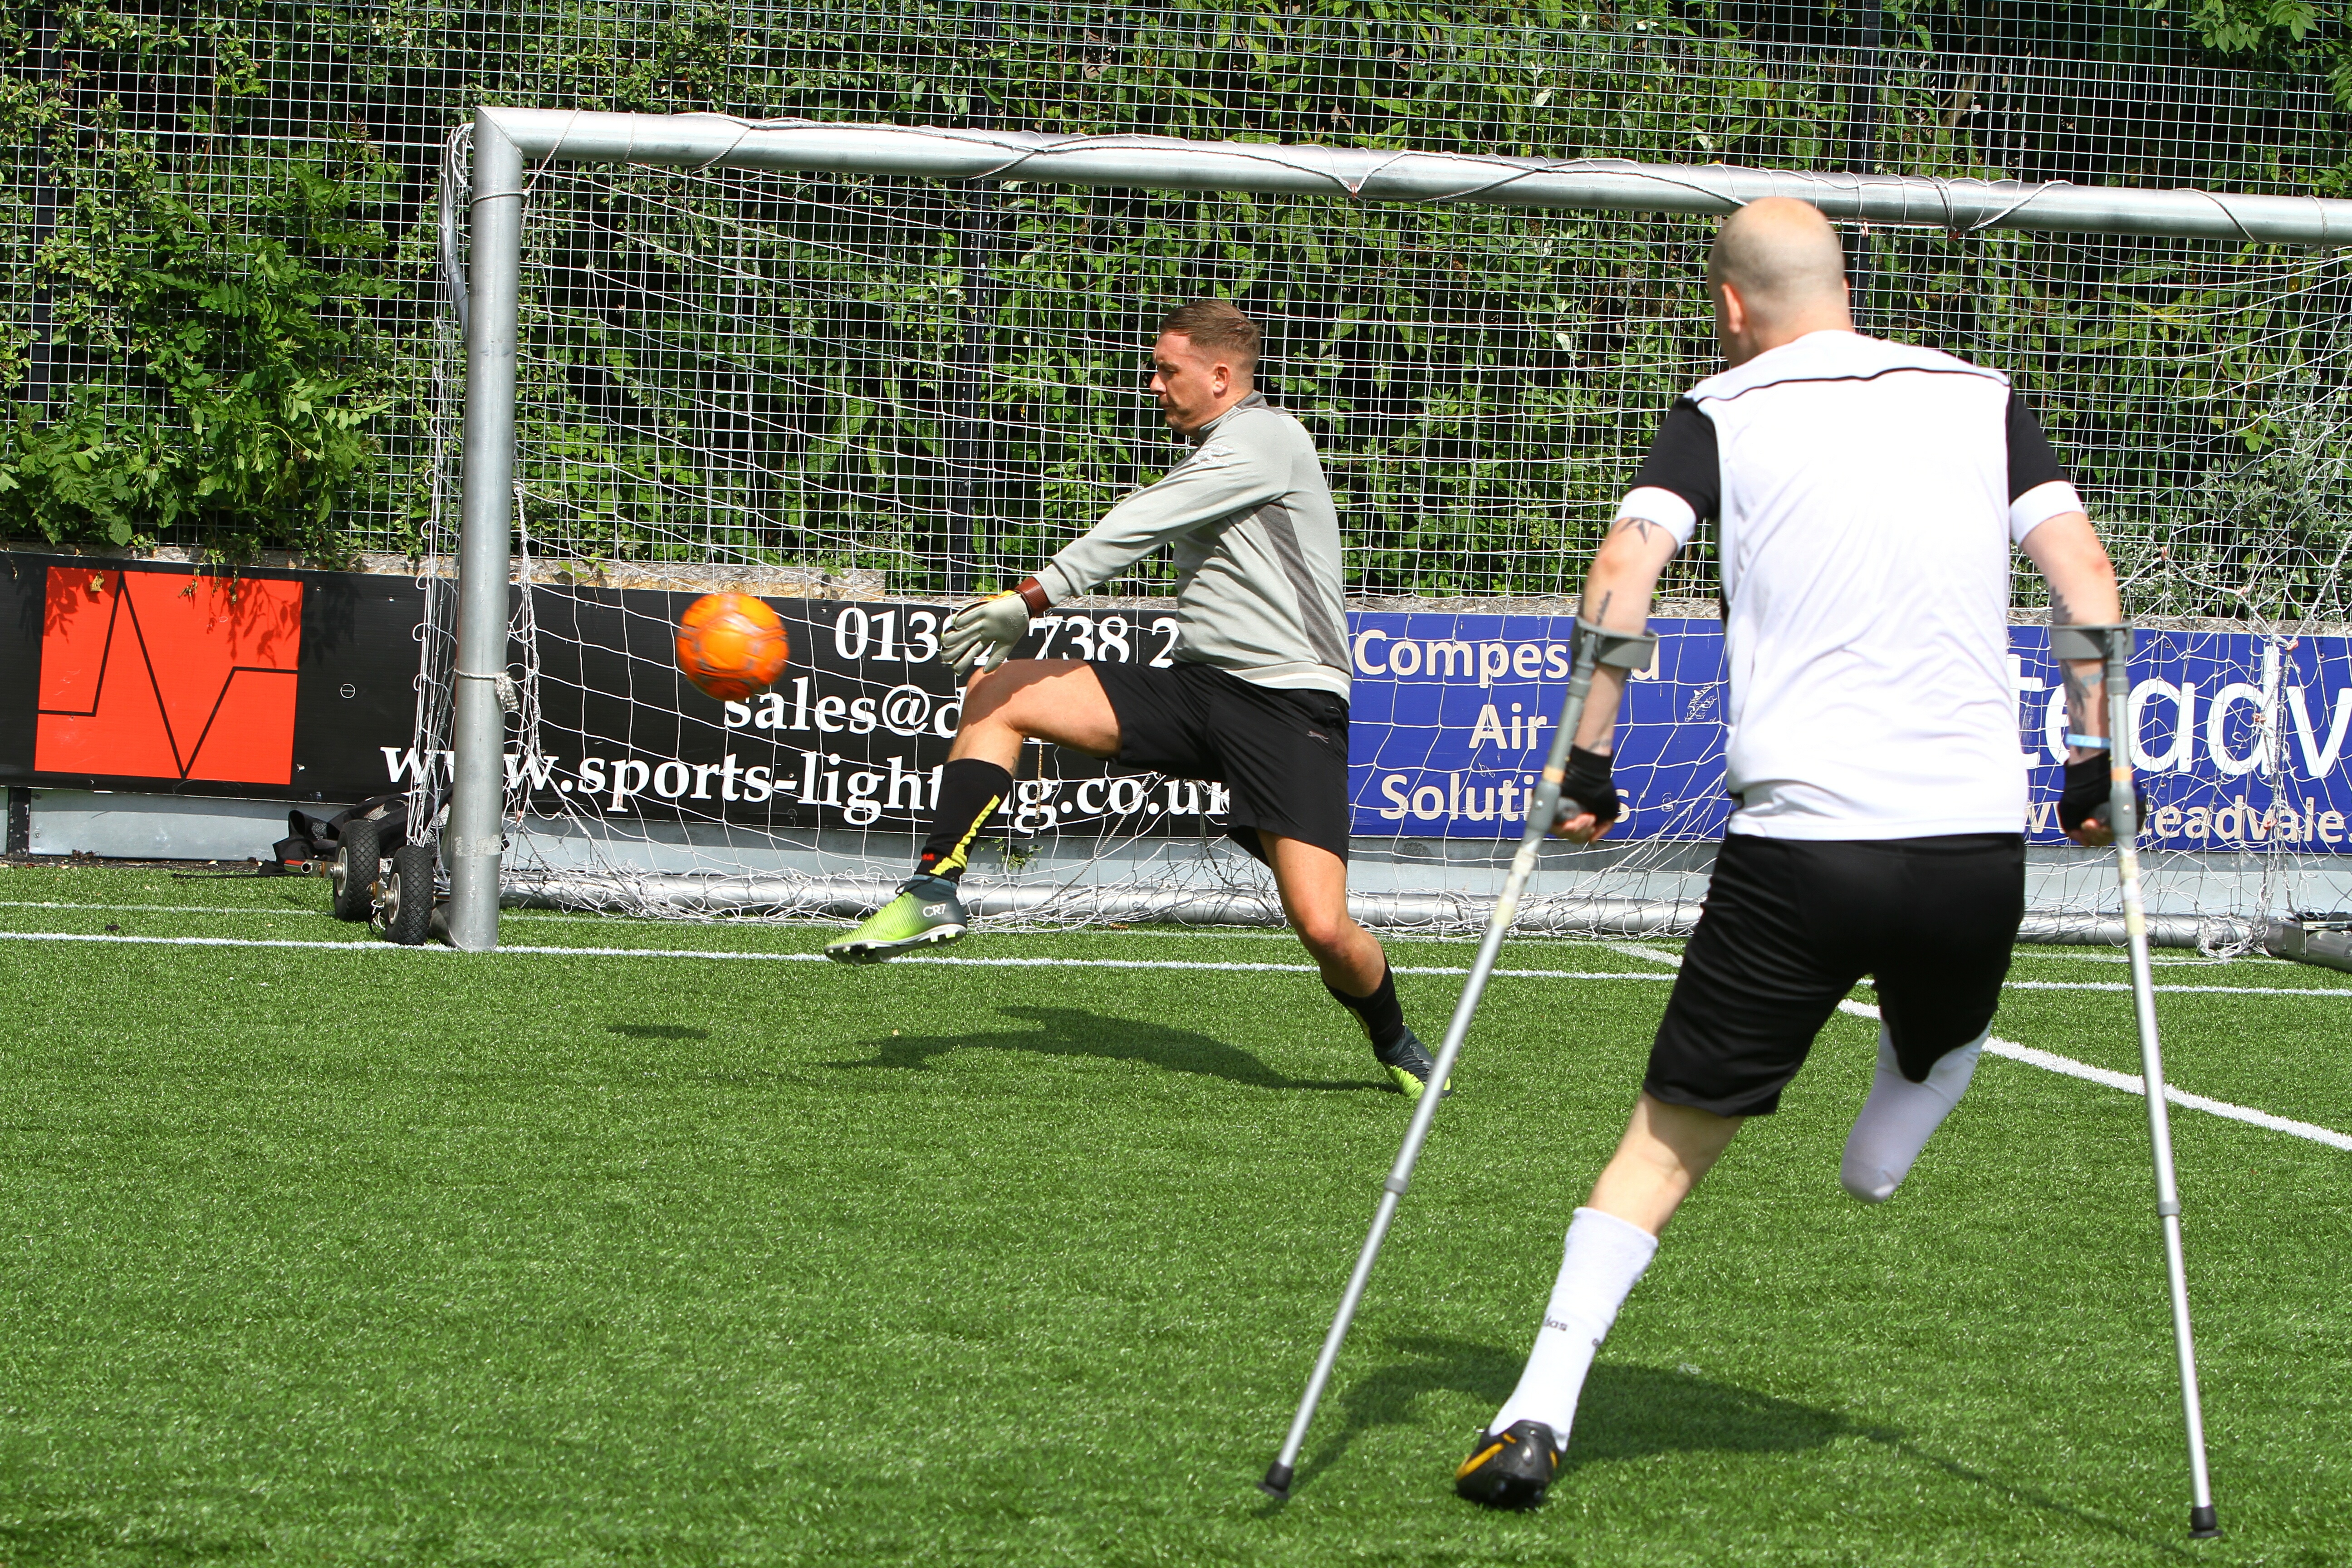 Rob Wilson firing in a shot with Steven Tully in goal, at the Amputee Football Programme training session at the GA Arena in Dundee